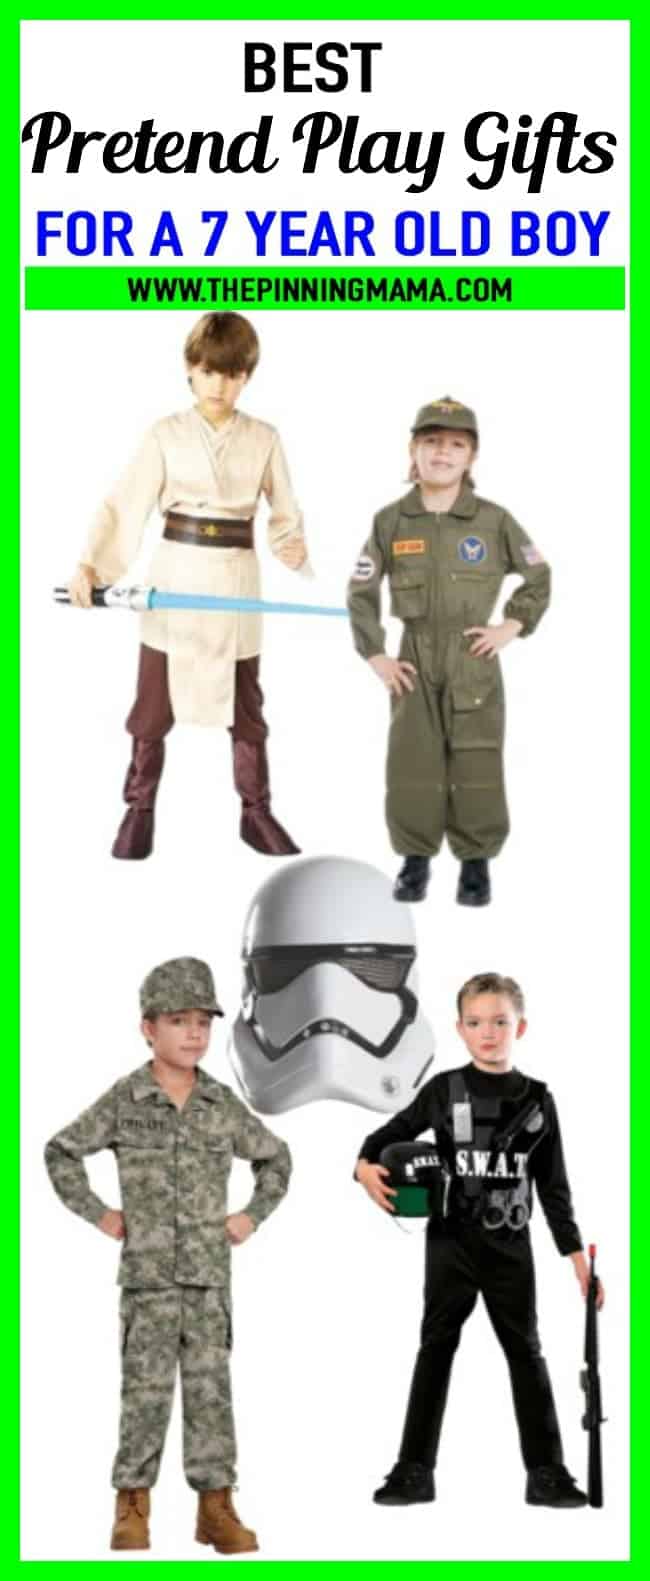 BEST Gift Ideas for a 7 Year Old Boy 